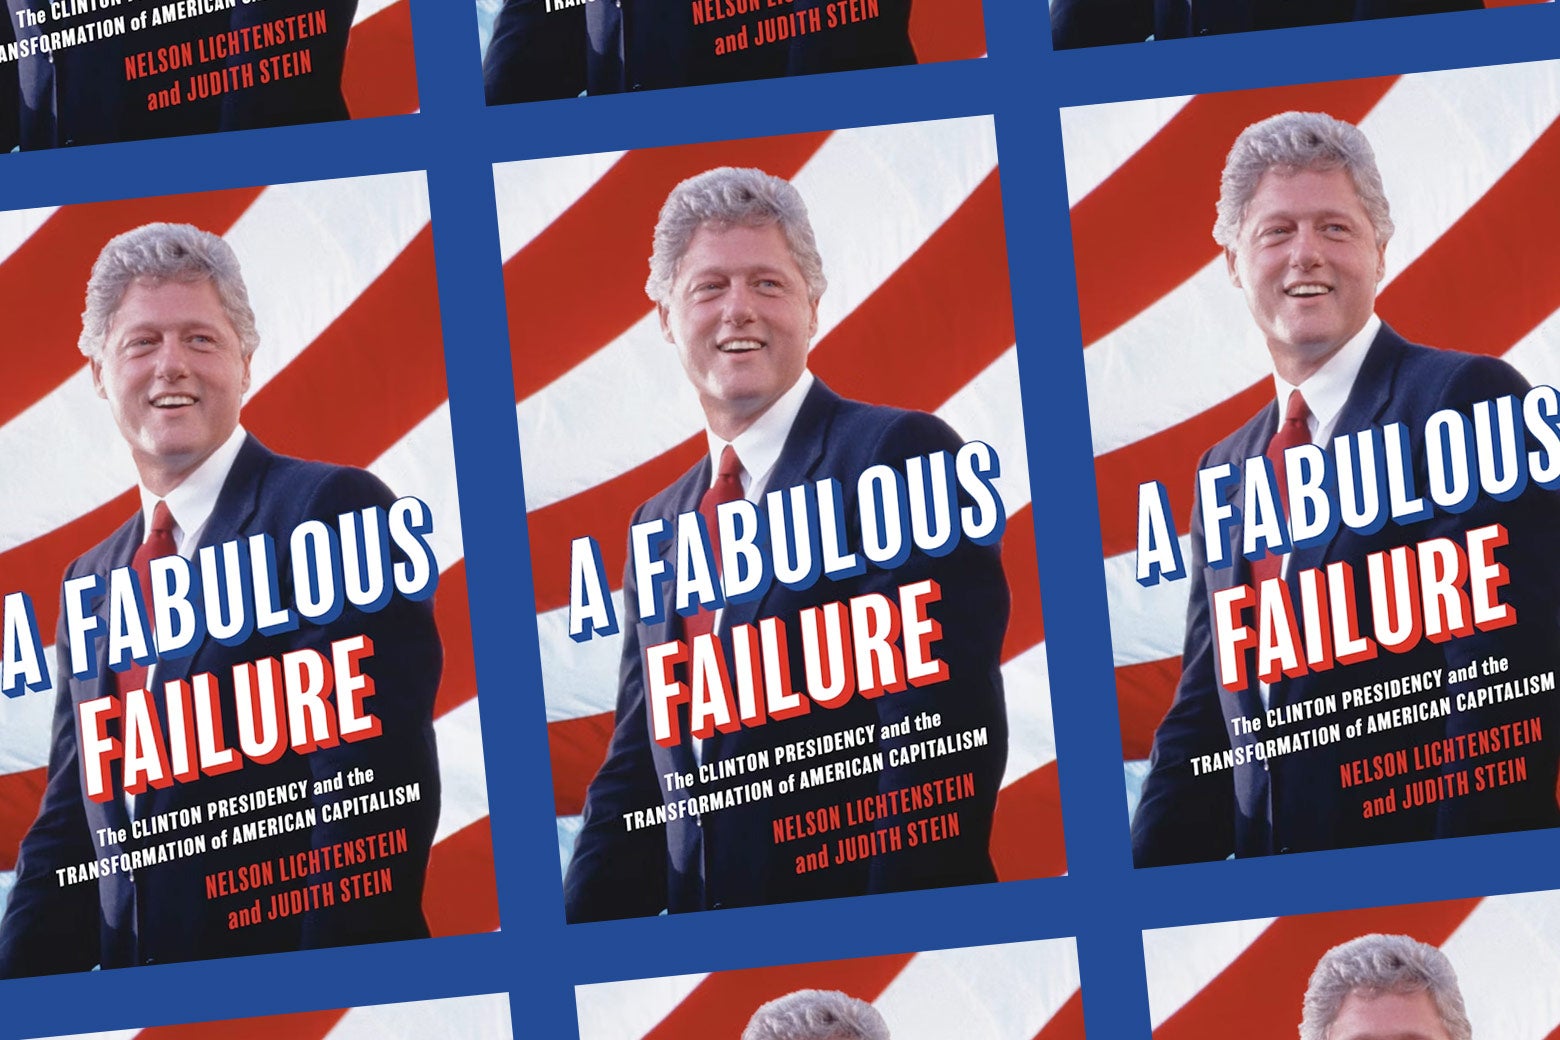 The Left Can’t Stop Wondering Where Bill Clinton Went Wrong. The Answer Explains a Lot. Paul M. Renfro and Matthew E. Stanley